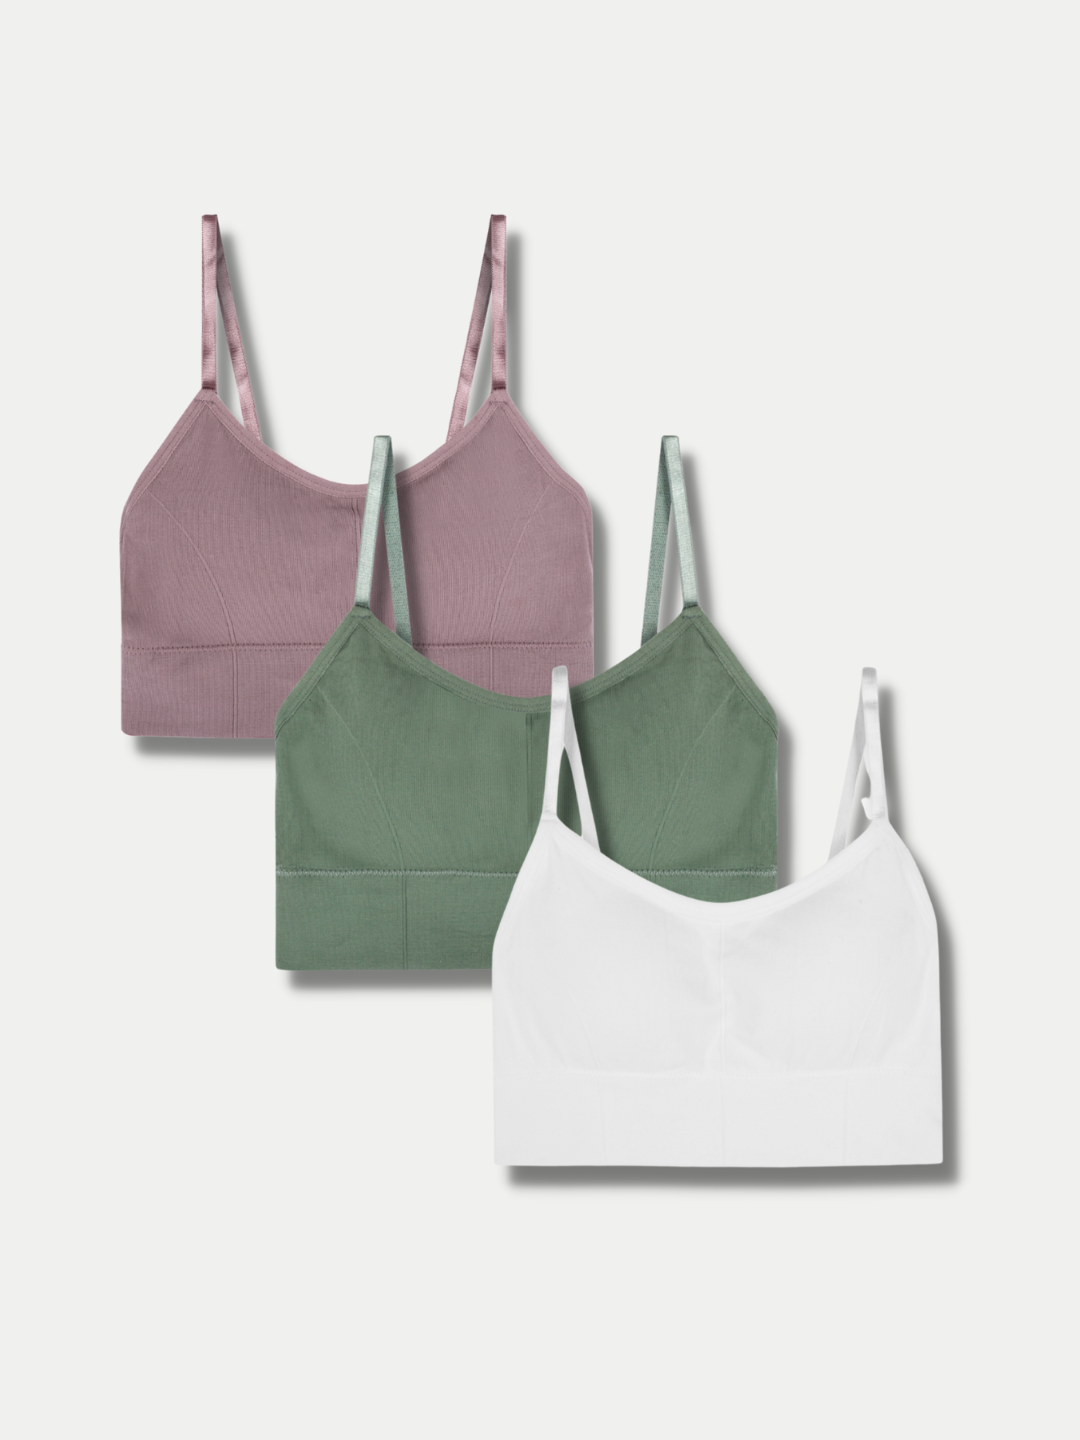 Buy TOM & GEE Pack Of 3 Full Coverage Seamless Camisole Bra With